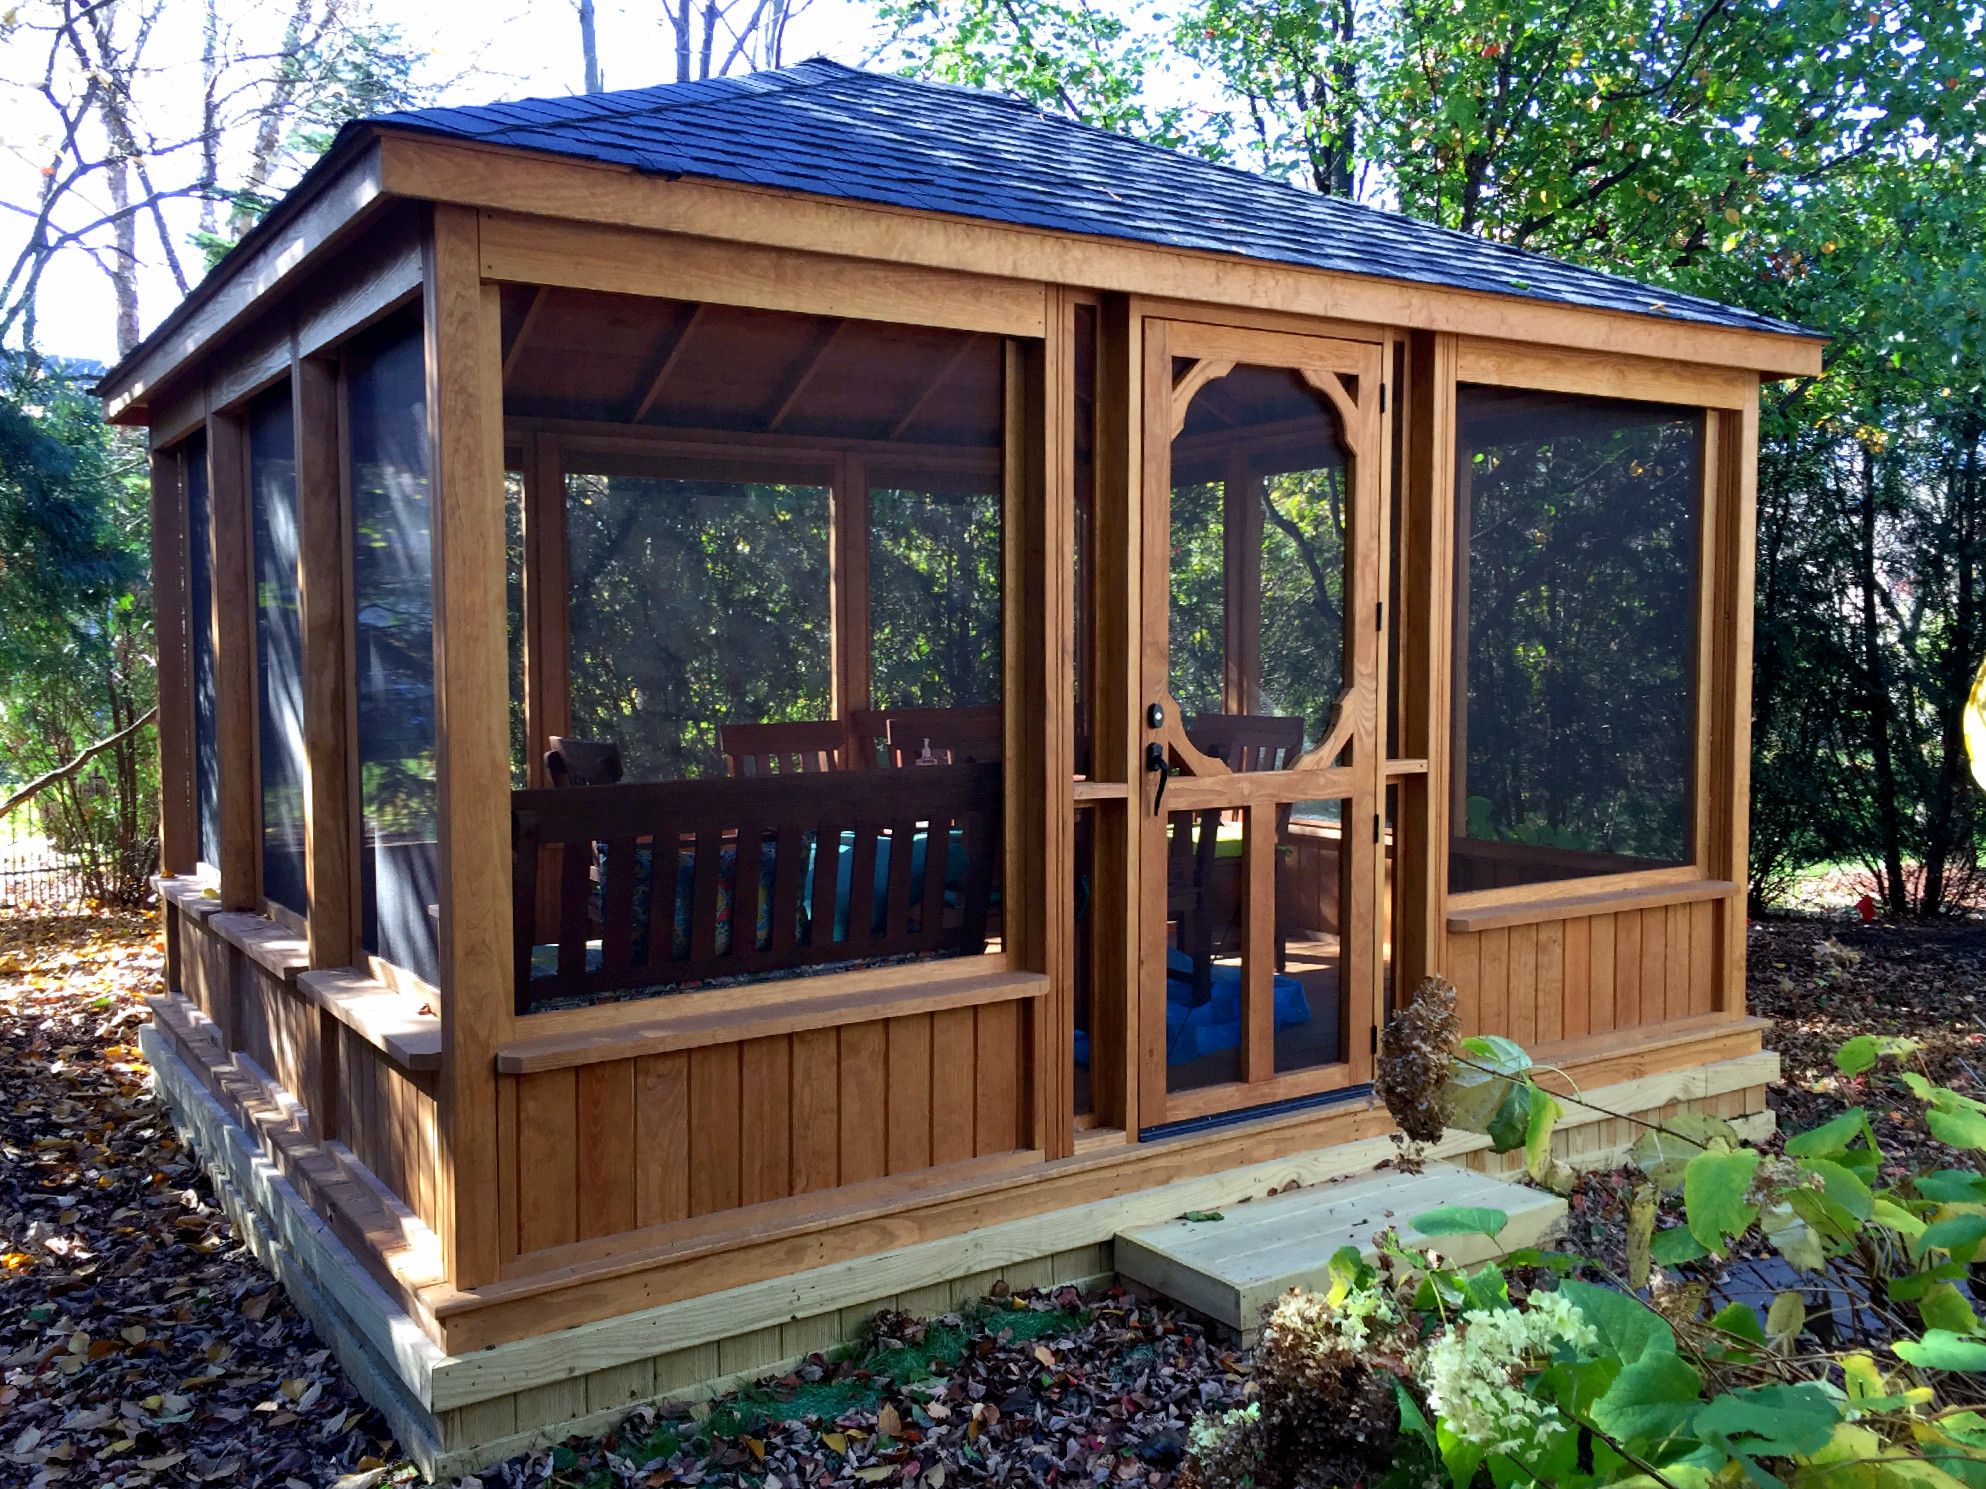 This gazebo features a low knee wall and large screened walls ...